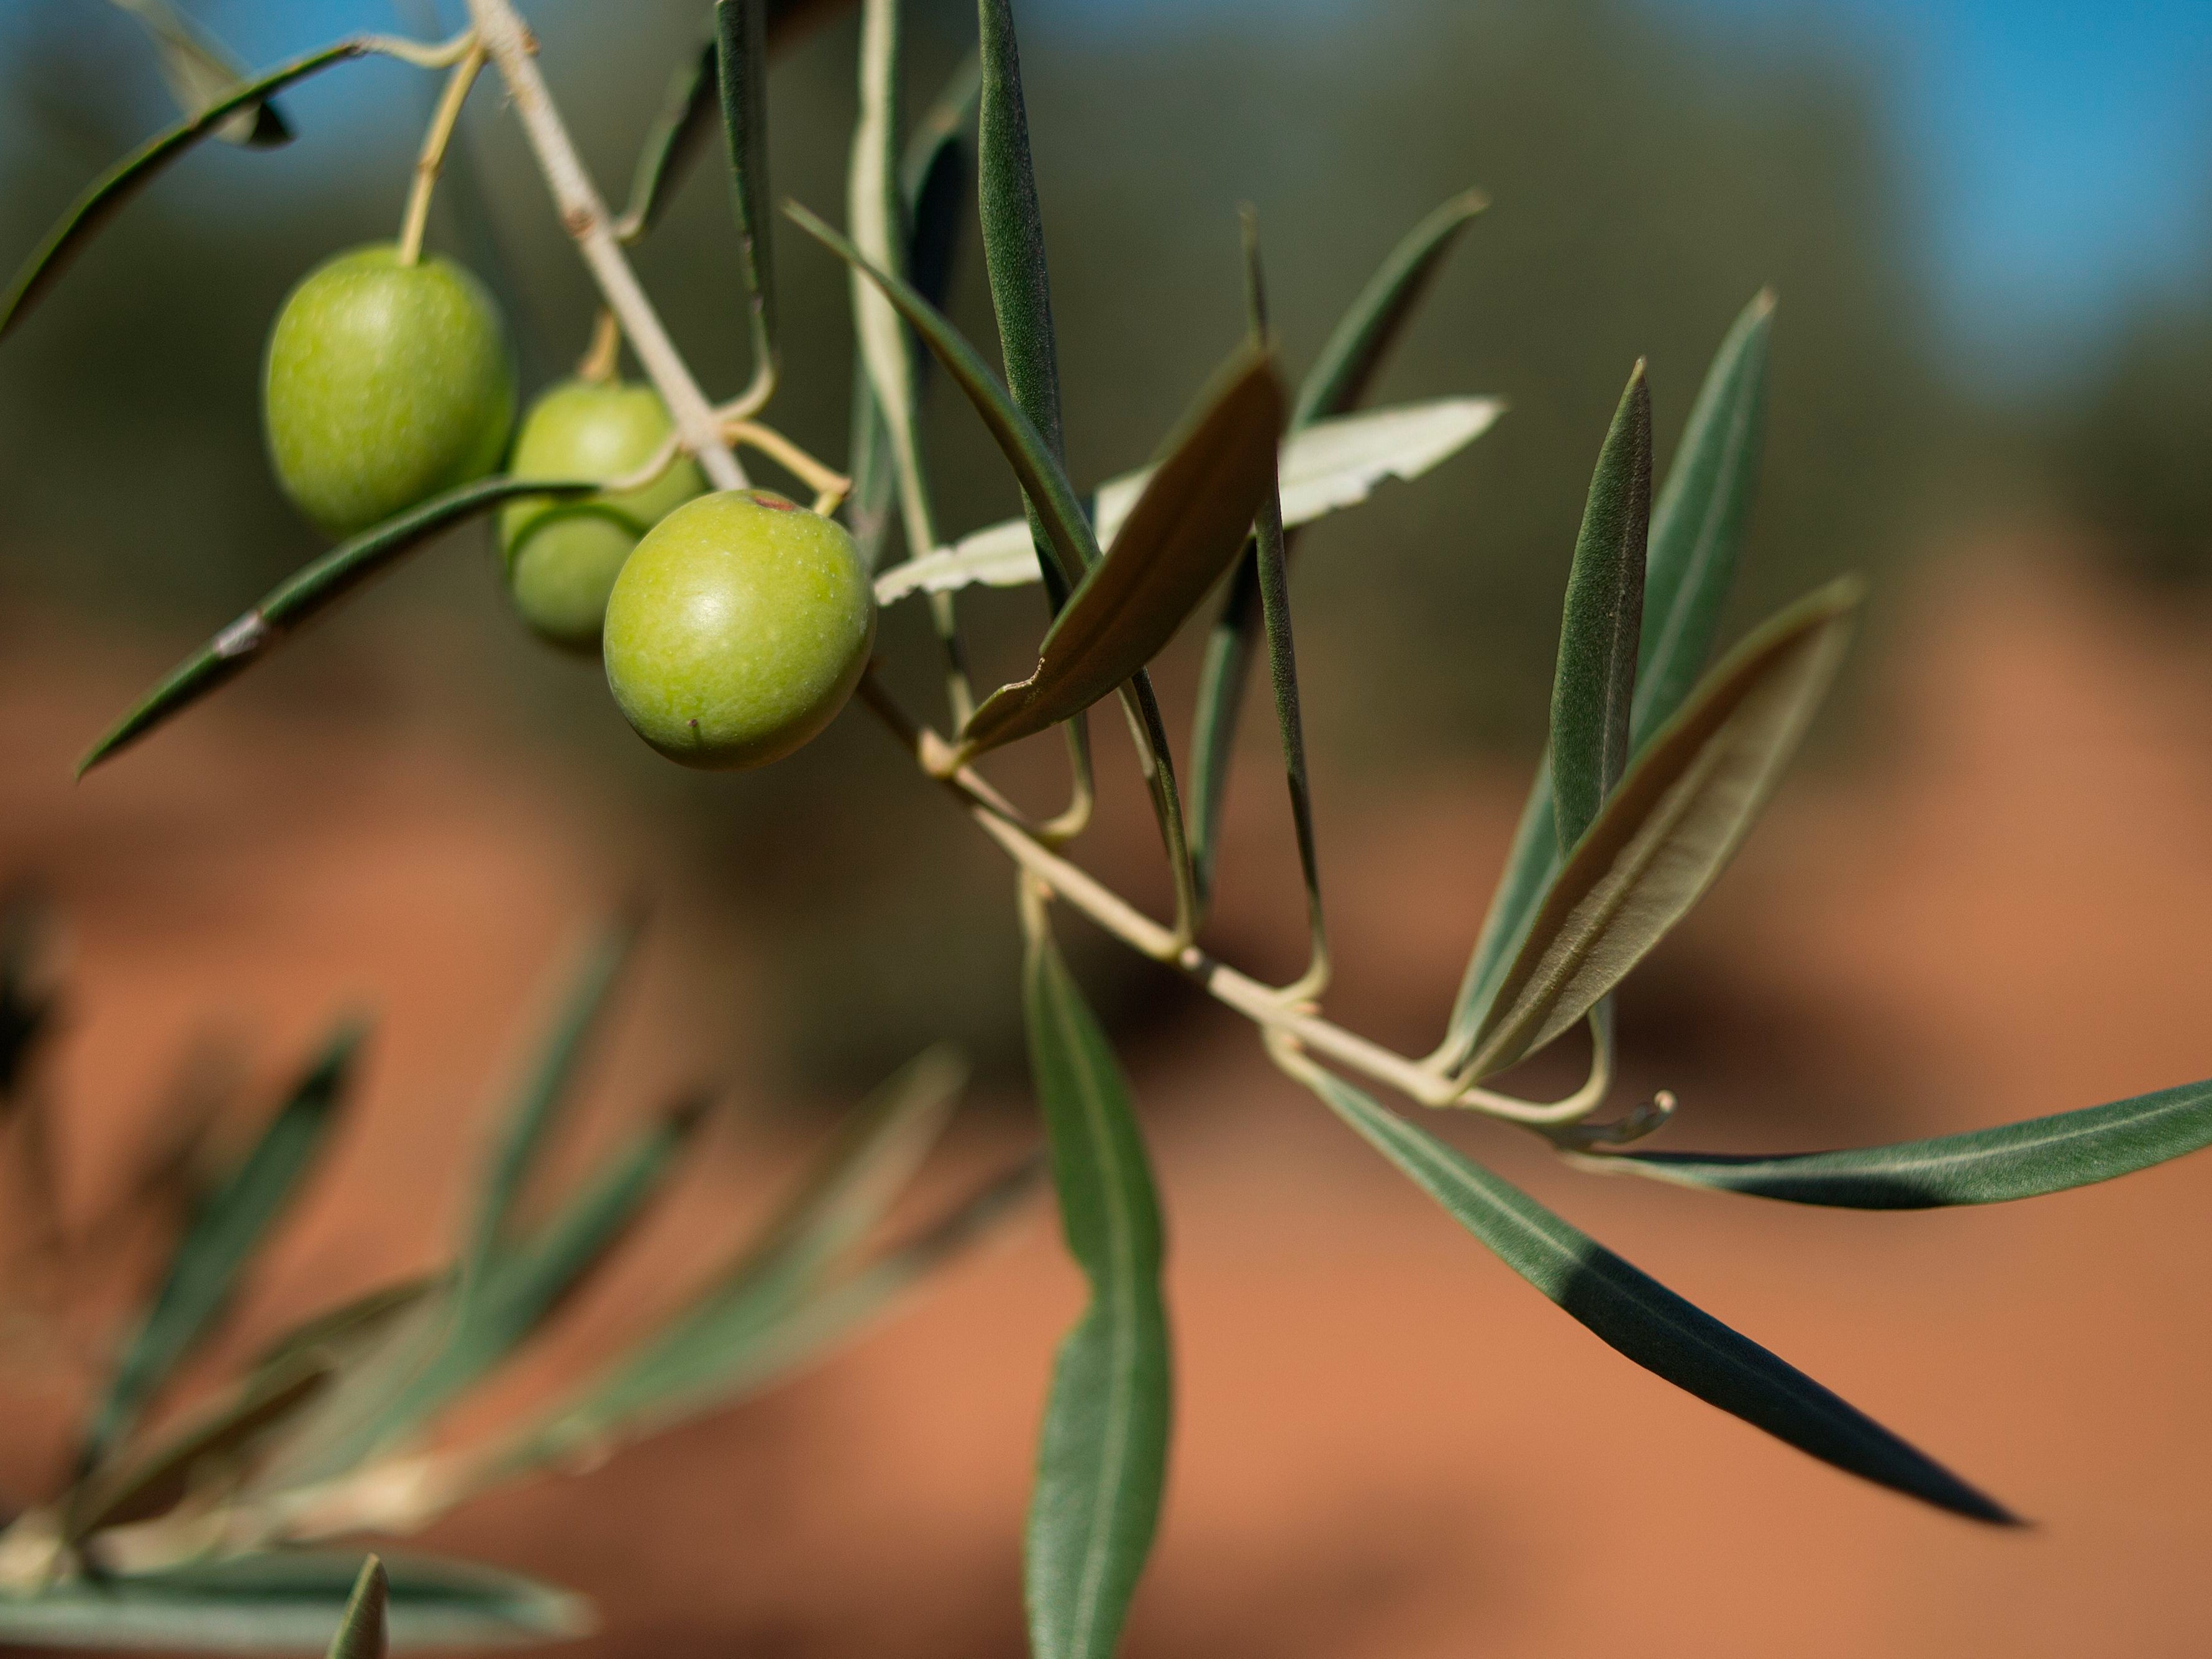 Spain is reportedly on track to produce 400,000 fewer tonnes of olive oil this year